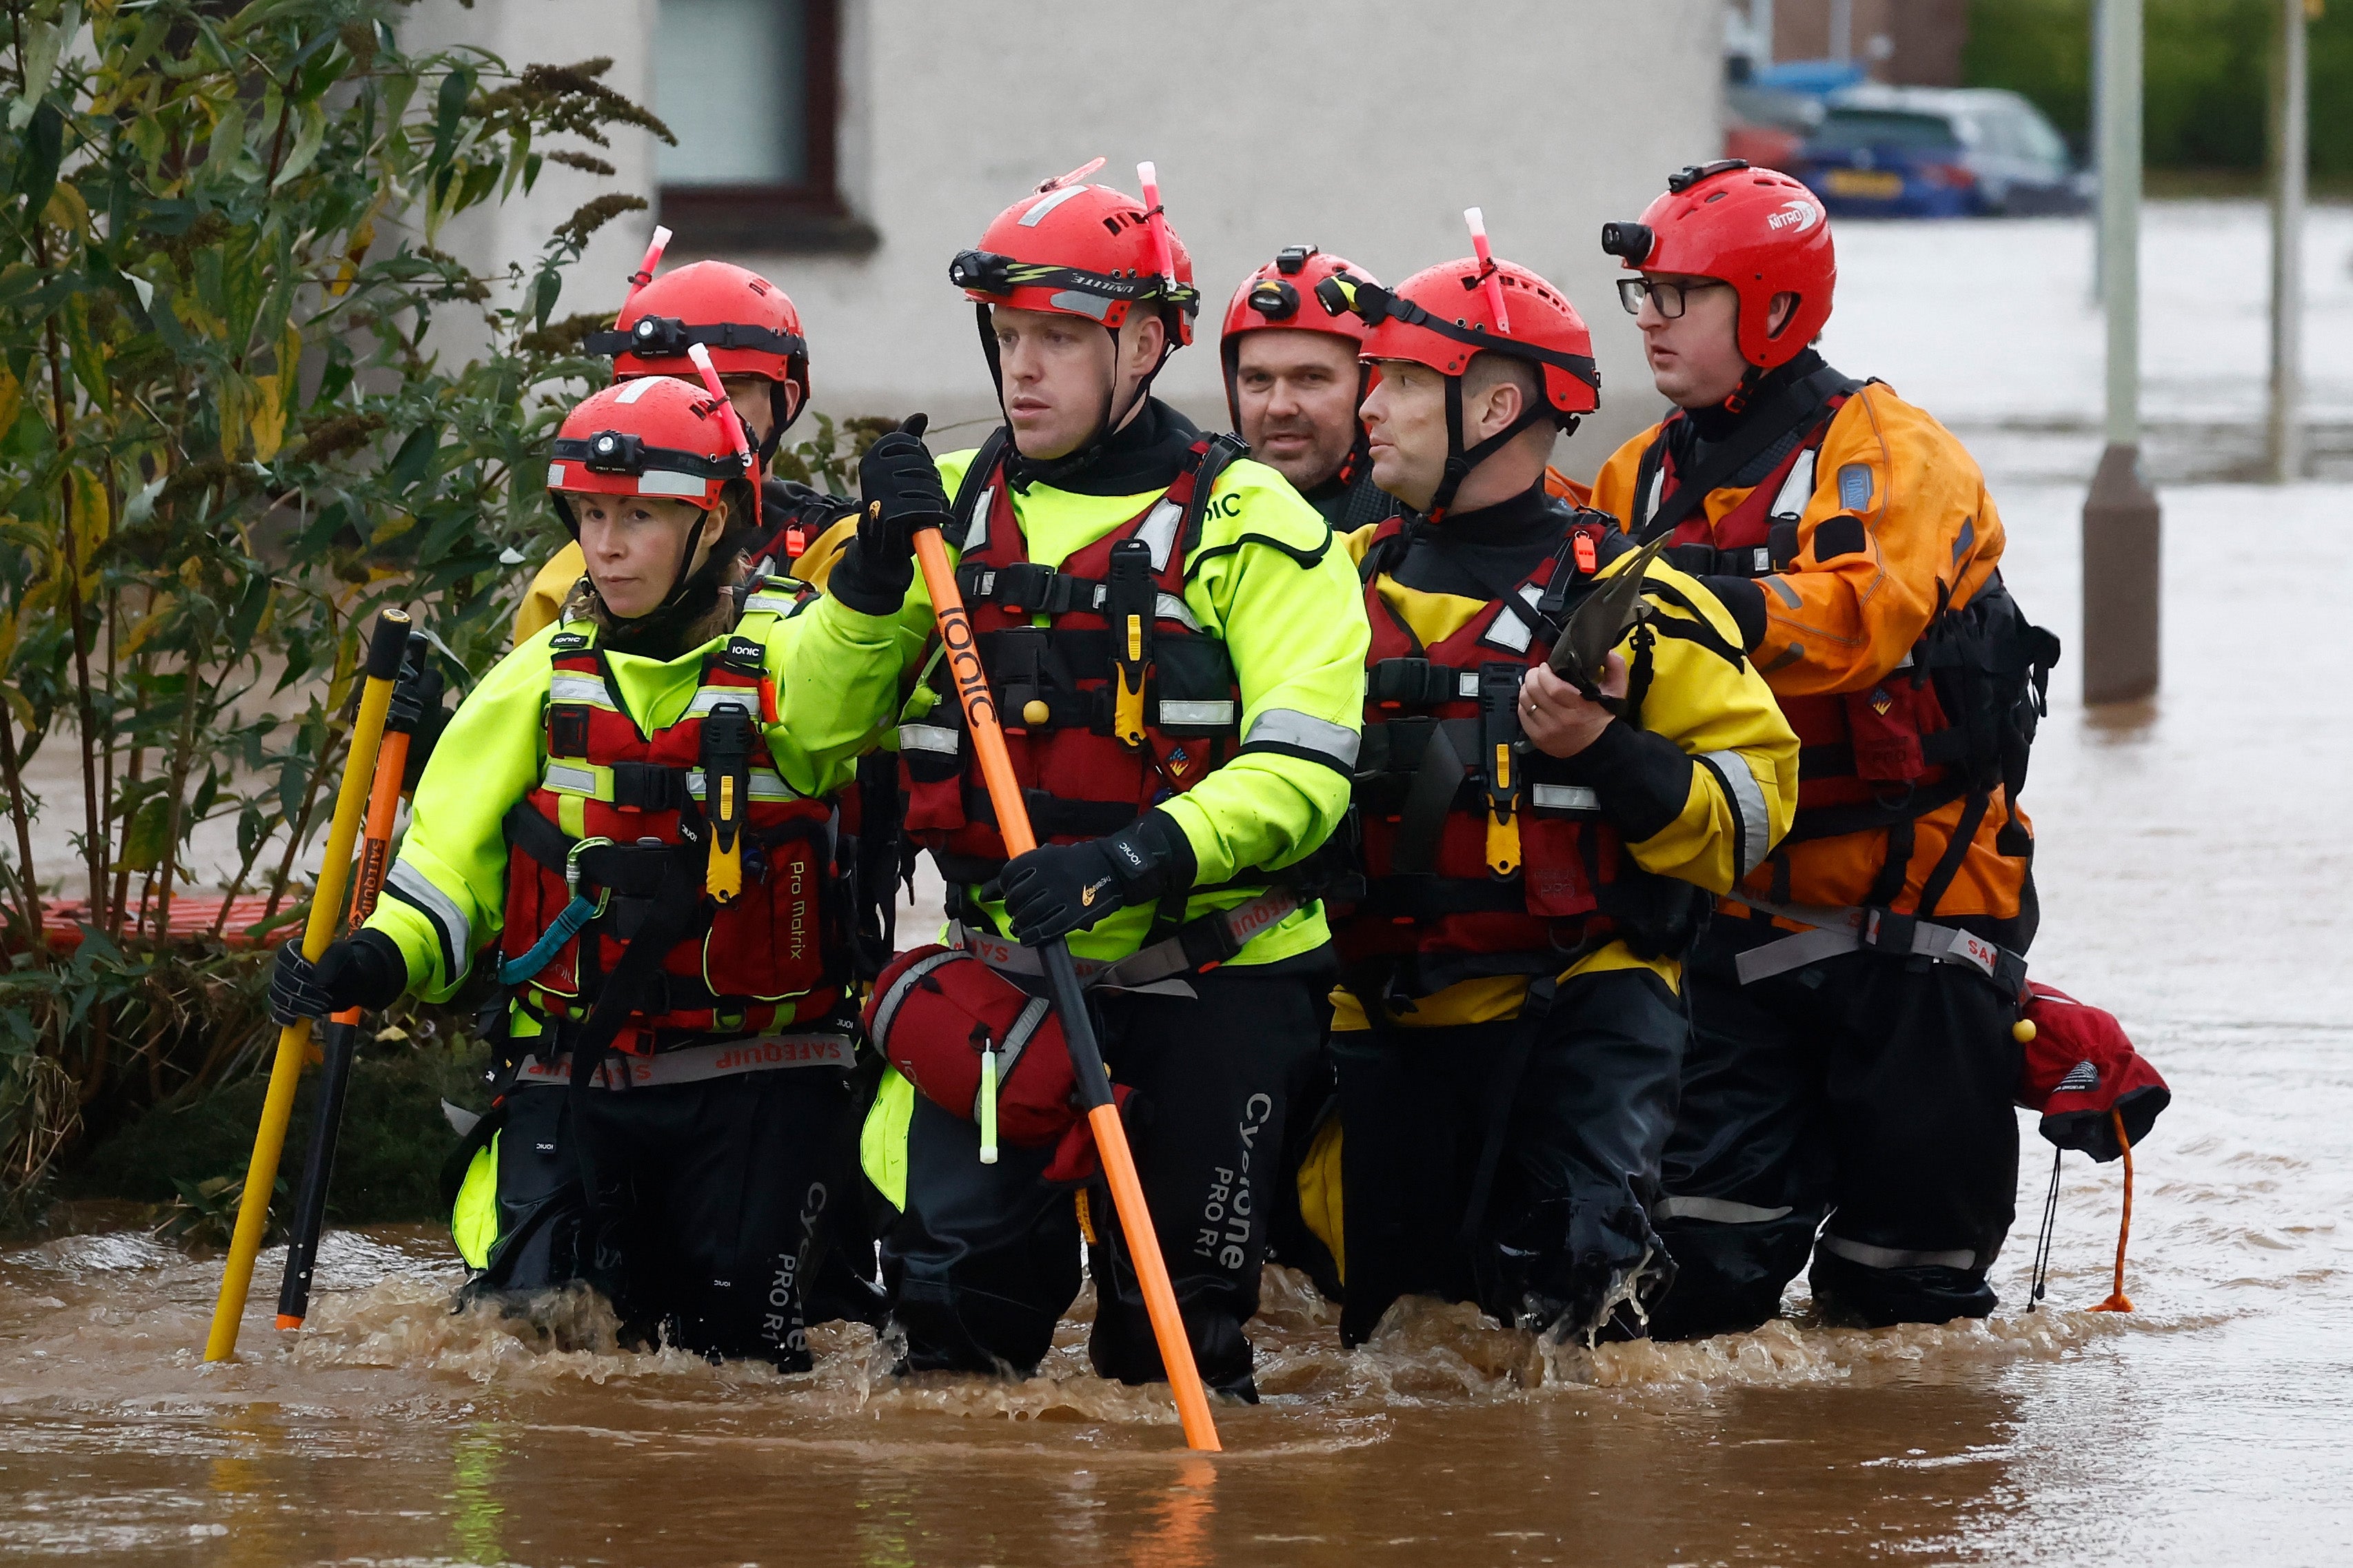 Members of a rescue team wade through the flood waters in Brechin after hundreds of homes were evacuated